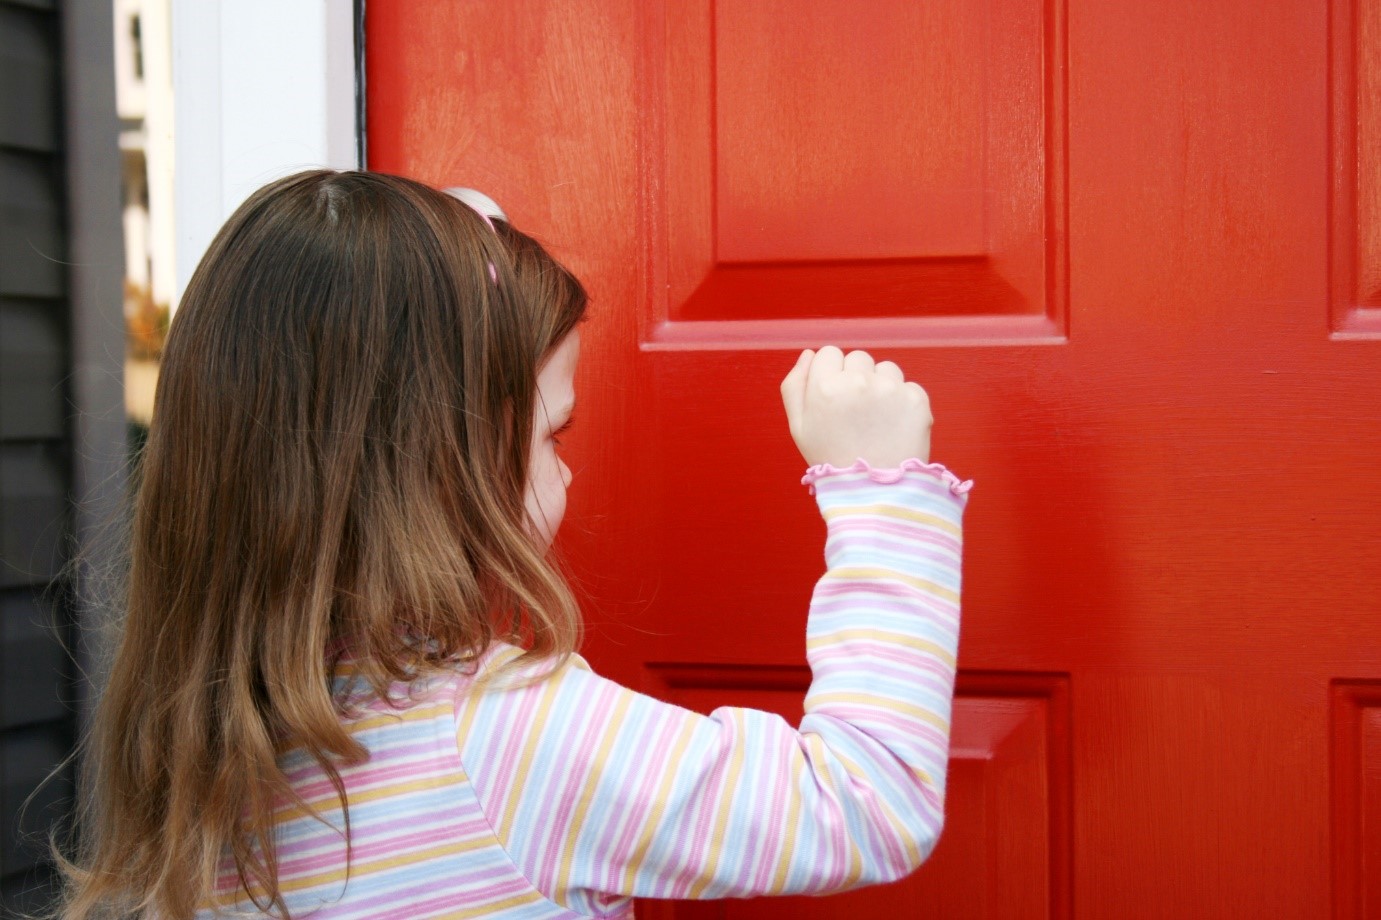 Knocking on people’s doors without a lawful excuse